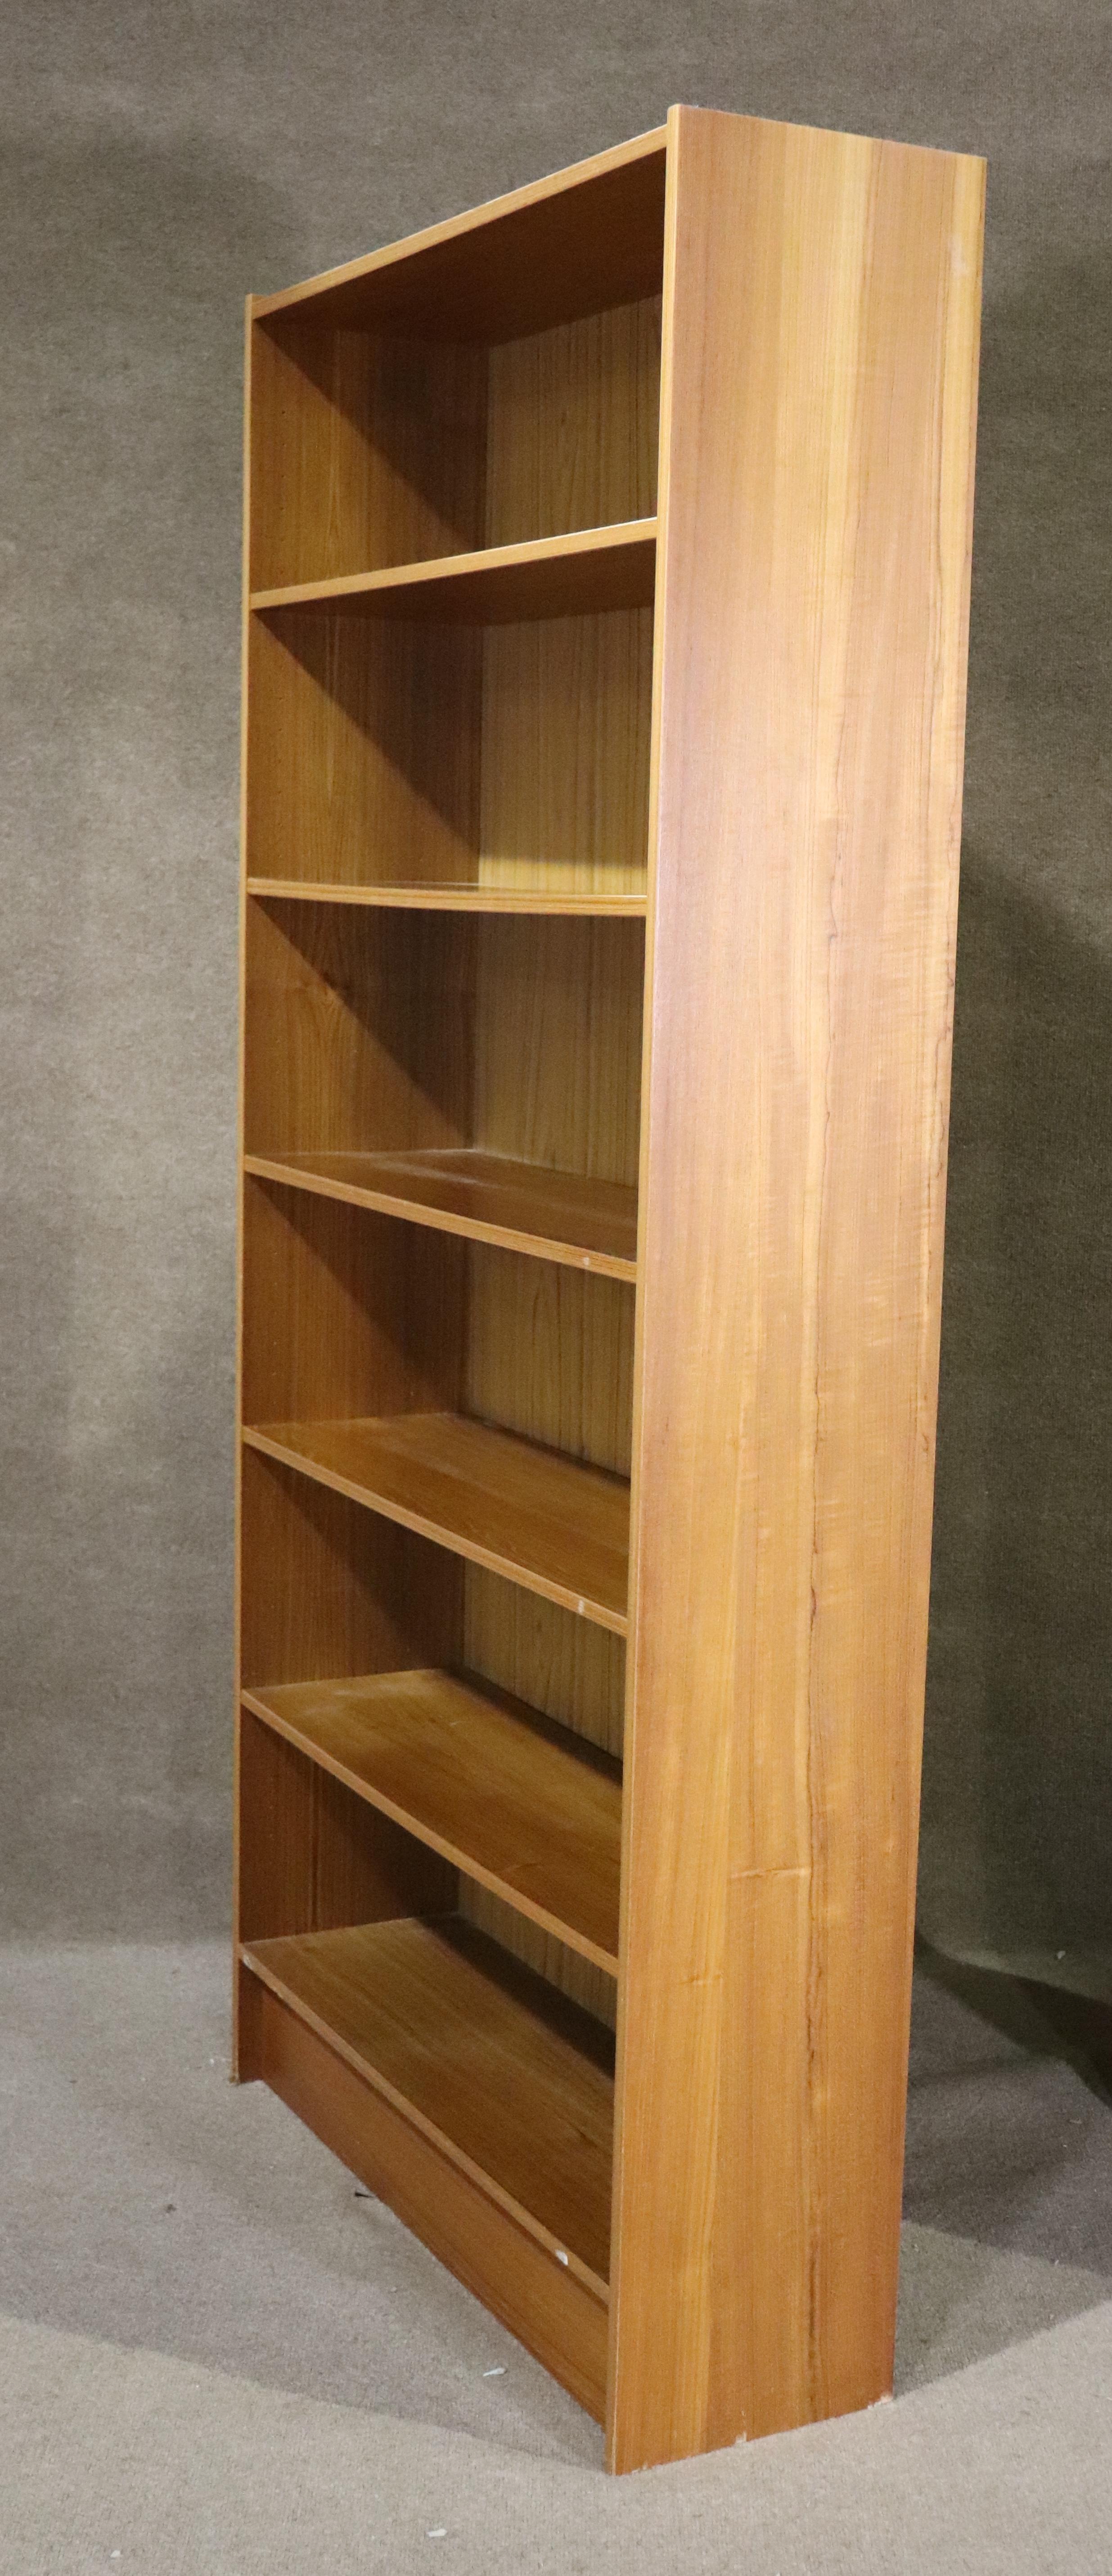 Large standing bookcase in teak veneer. Six wide shelves in a six foot tall unit.
Please confirm location NY or NJ